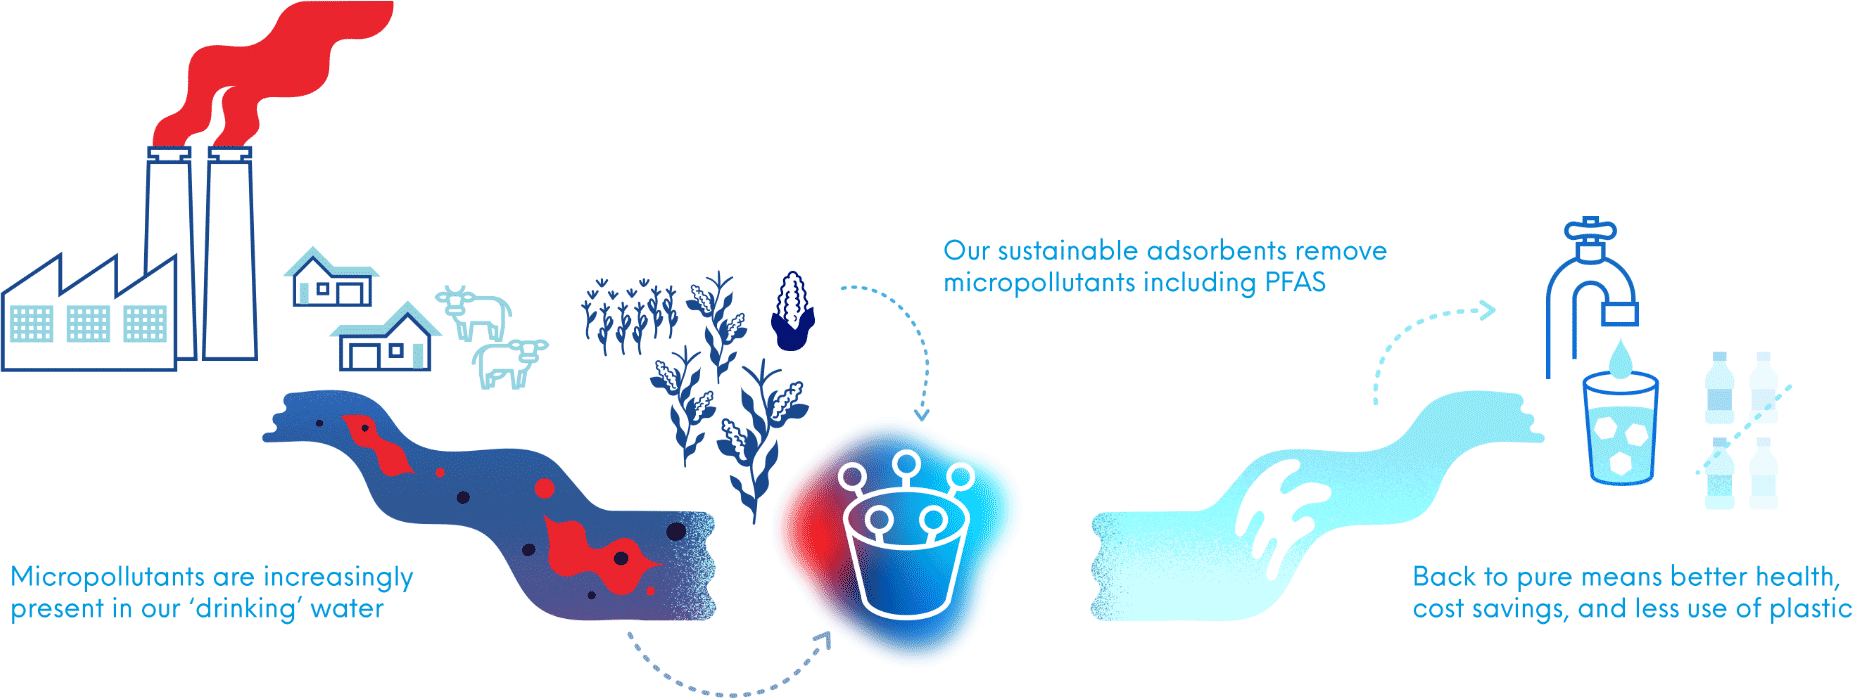 Micropollutants are increasingly present in our drinking water. Our sustainable adsorbents remove micropollutants including PFAS. Back to pure means better health, cost savings, and less use of plastic.